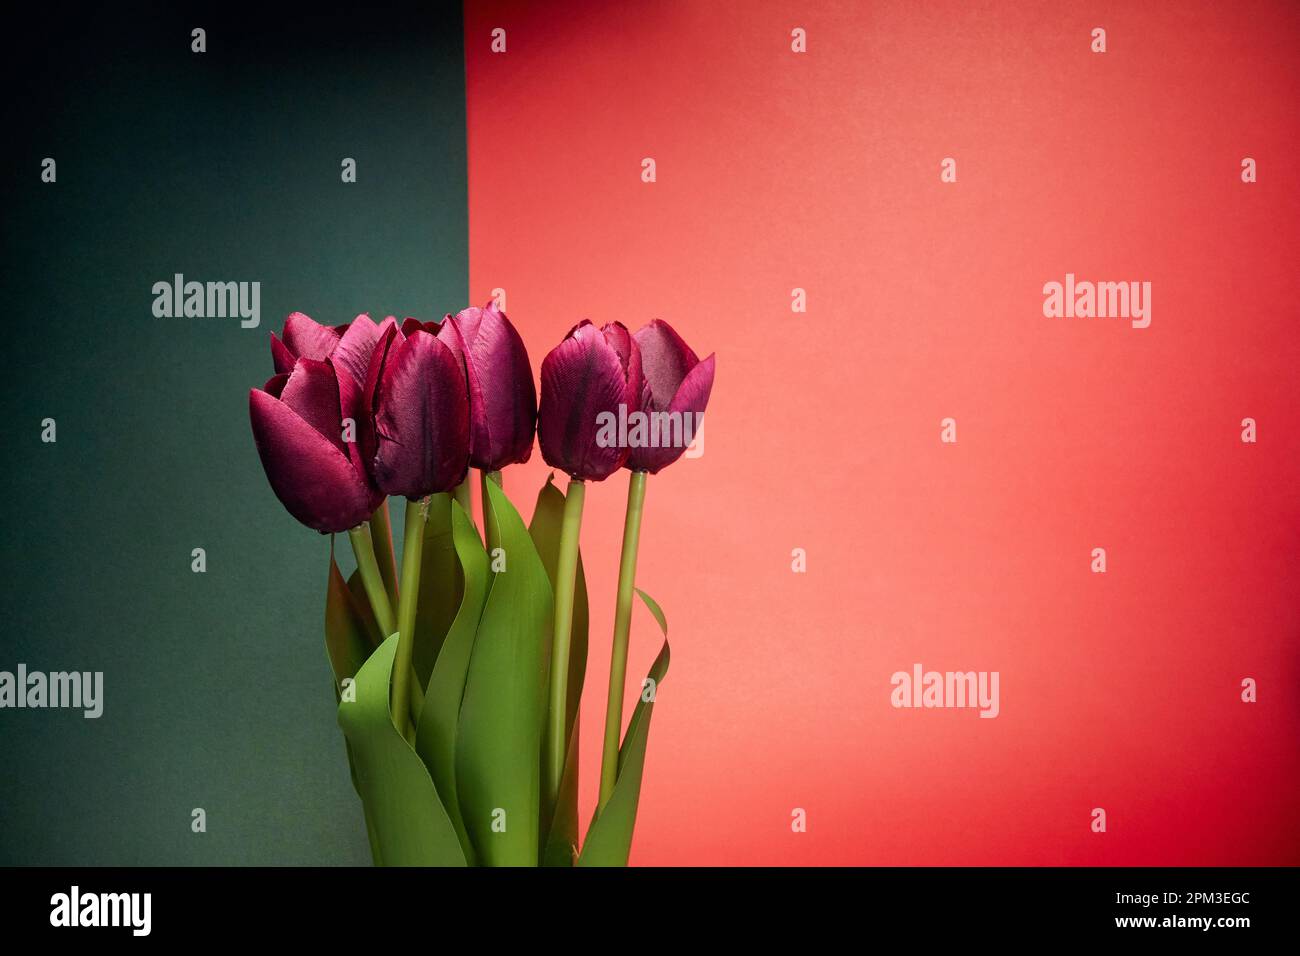 Close-up view at red tulips under the light in front of red-black background. Natural, flowers, fragrant Stock Photo